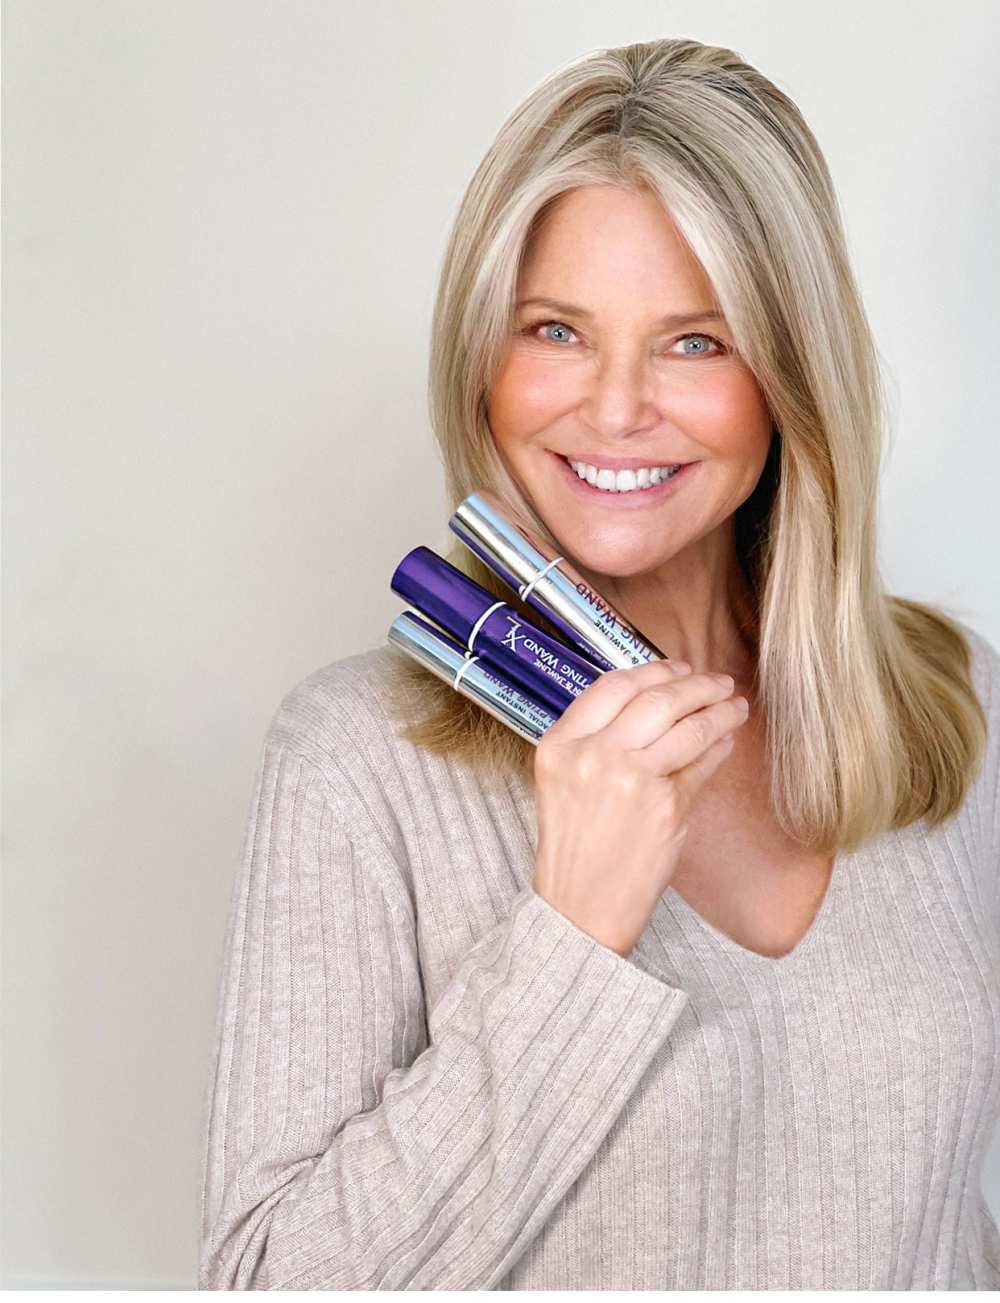 Christie Brinkley Tells Us Why She’s Partenering With SBLA